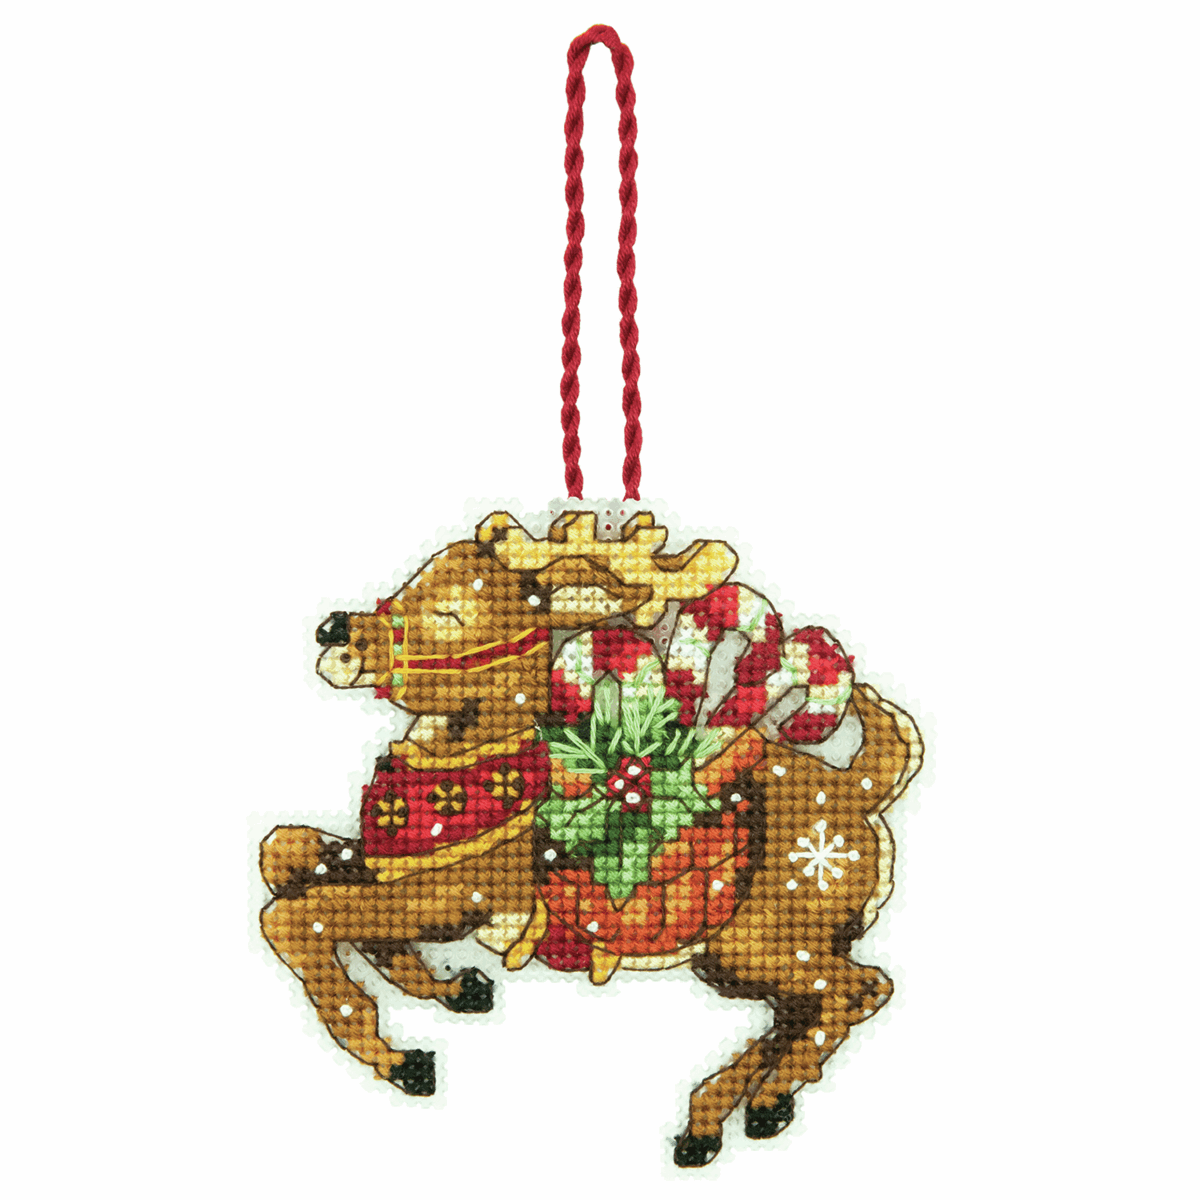 Counted Cross Stitch Ornament Kit - Reindeer